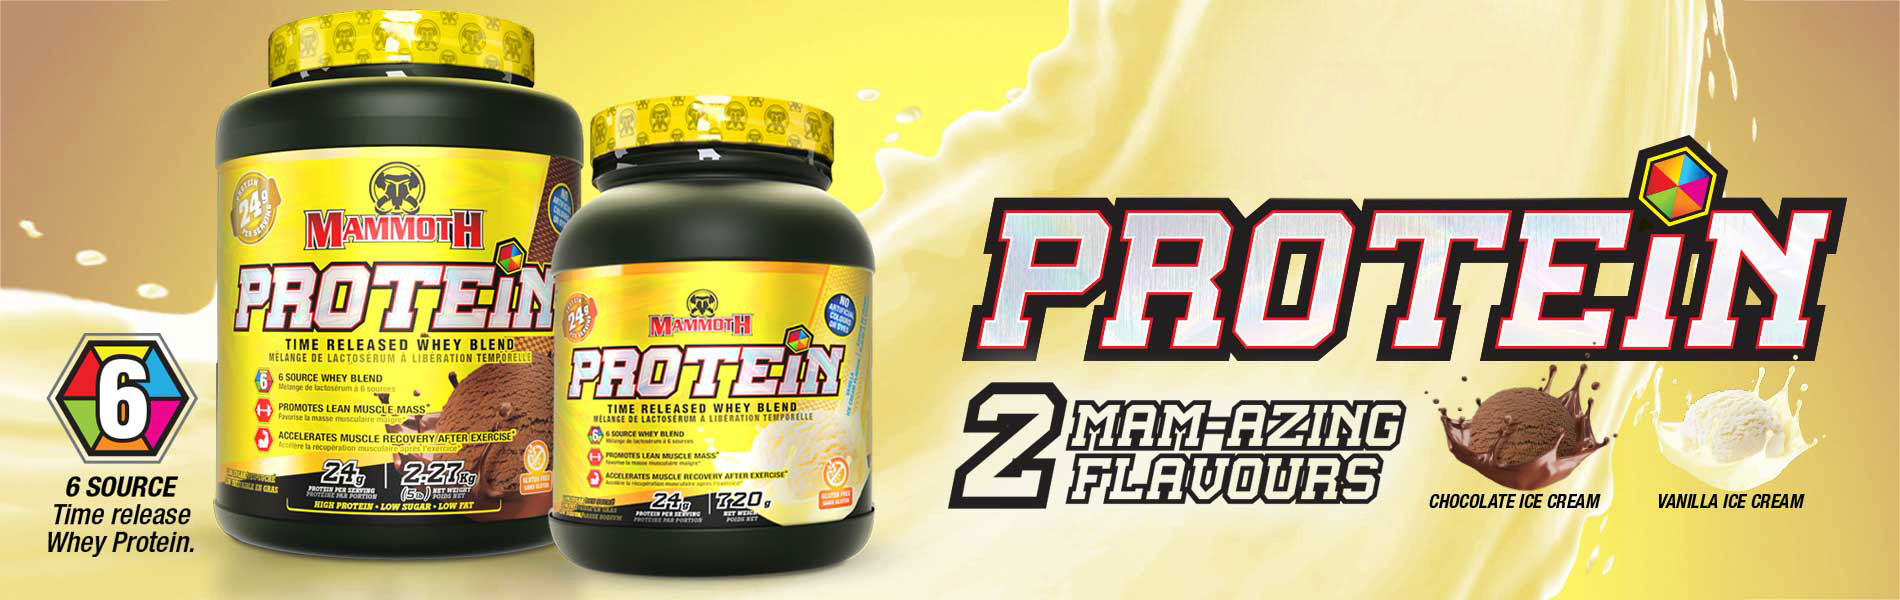 Mammoth PROTEIN AVAILABLE NOW